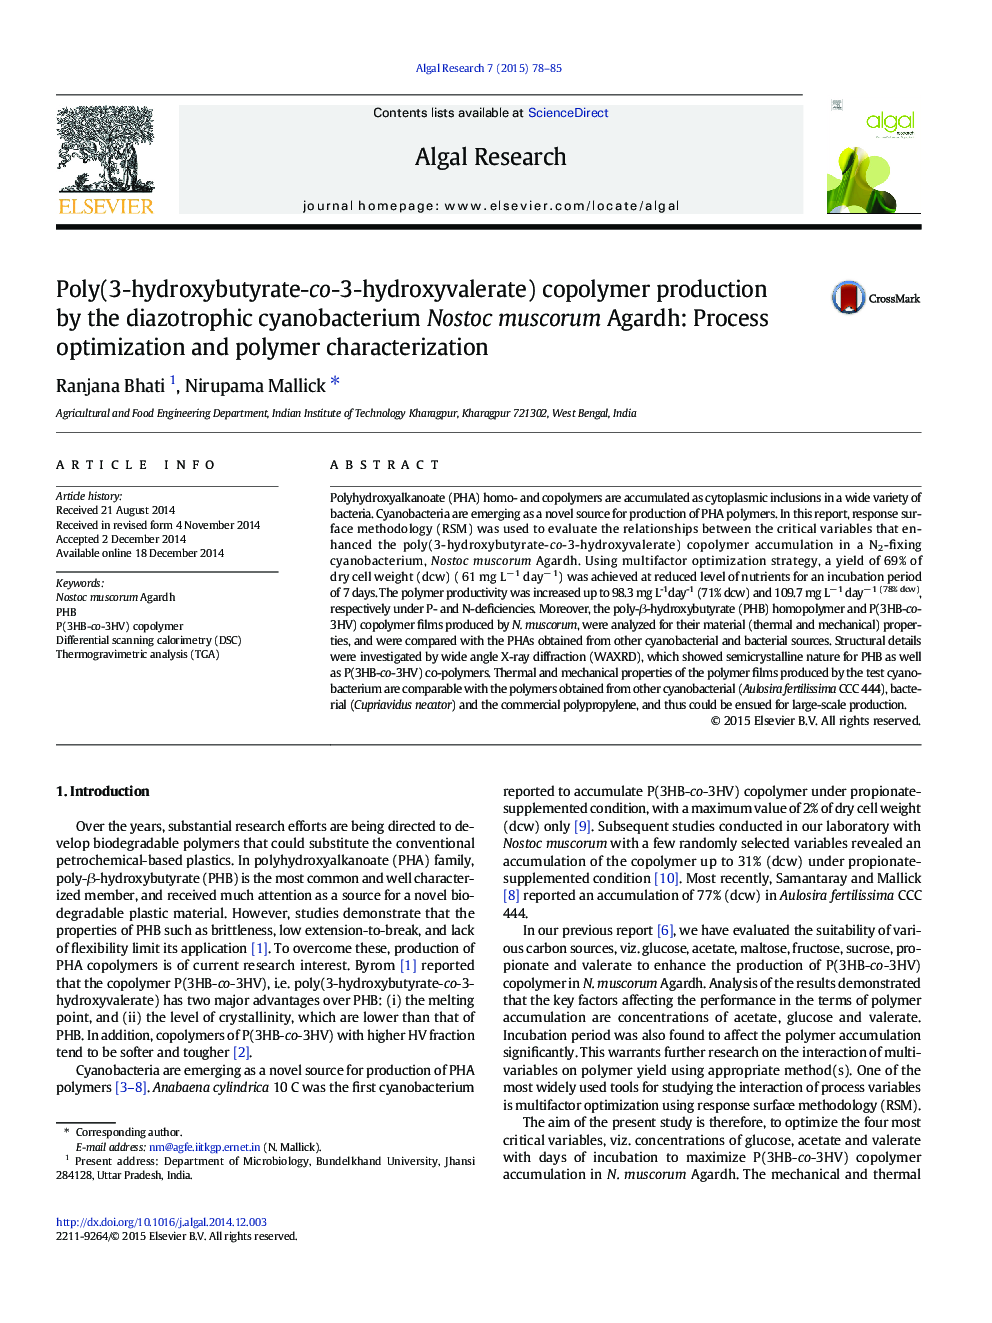 Poly(3-hydroxybutyrate-co-3-hydroxyvalerate) copolymer production by the diazotrophic cyanobacterium Nostoc muscorum Agardh: Process optimization and polymer characterization